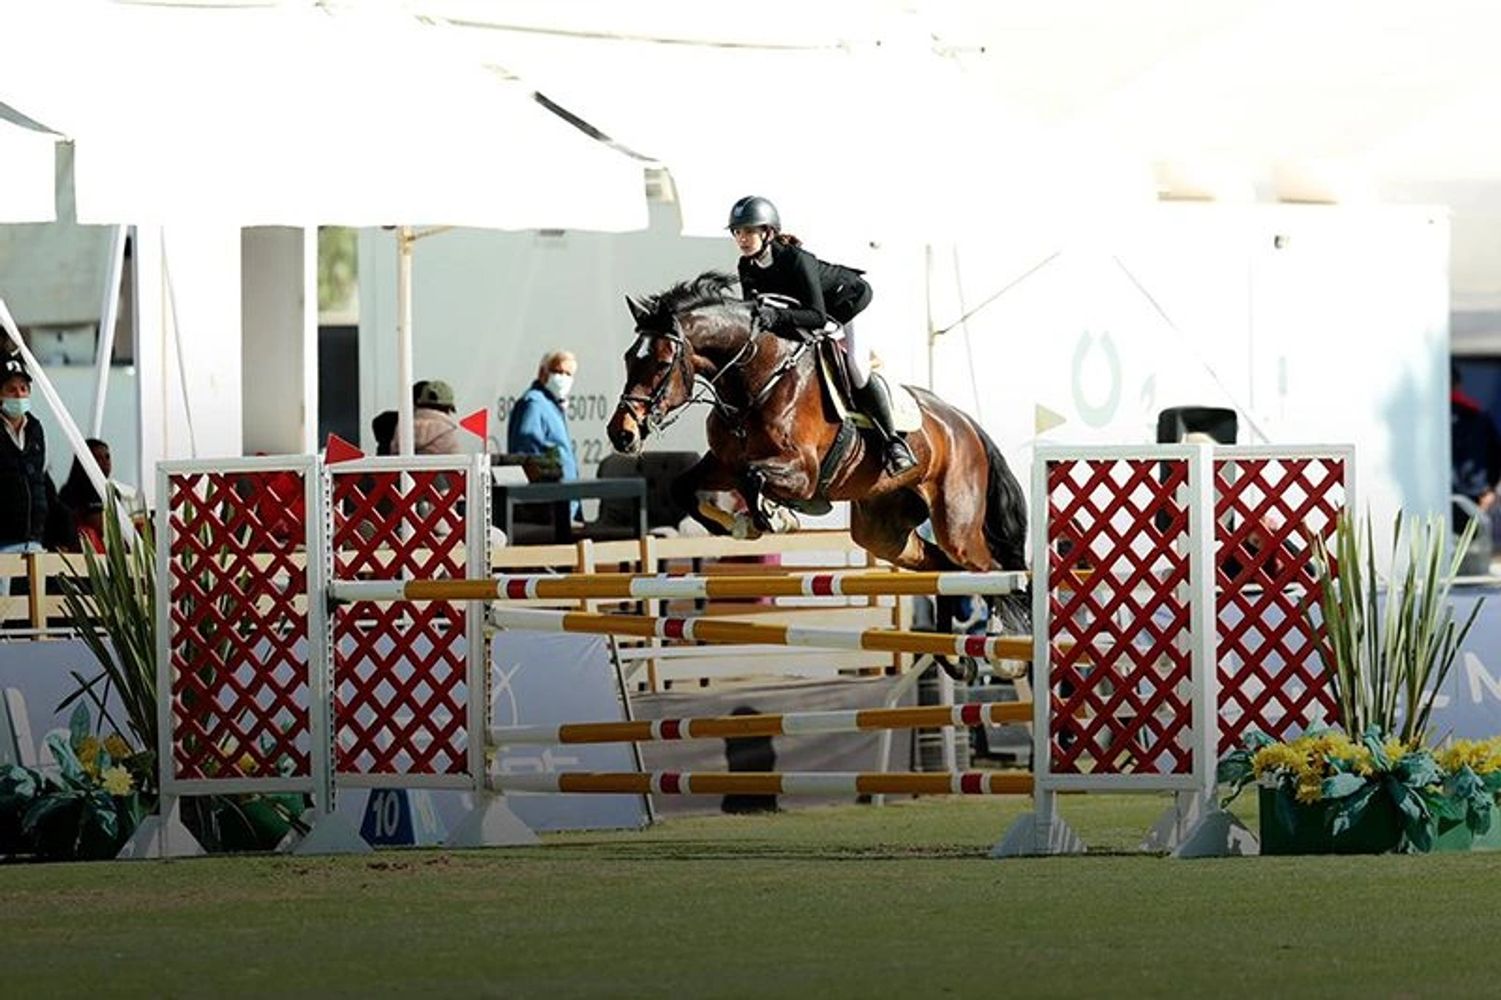 Horse jumping over poles